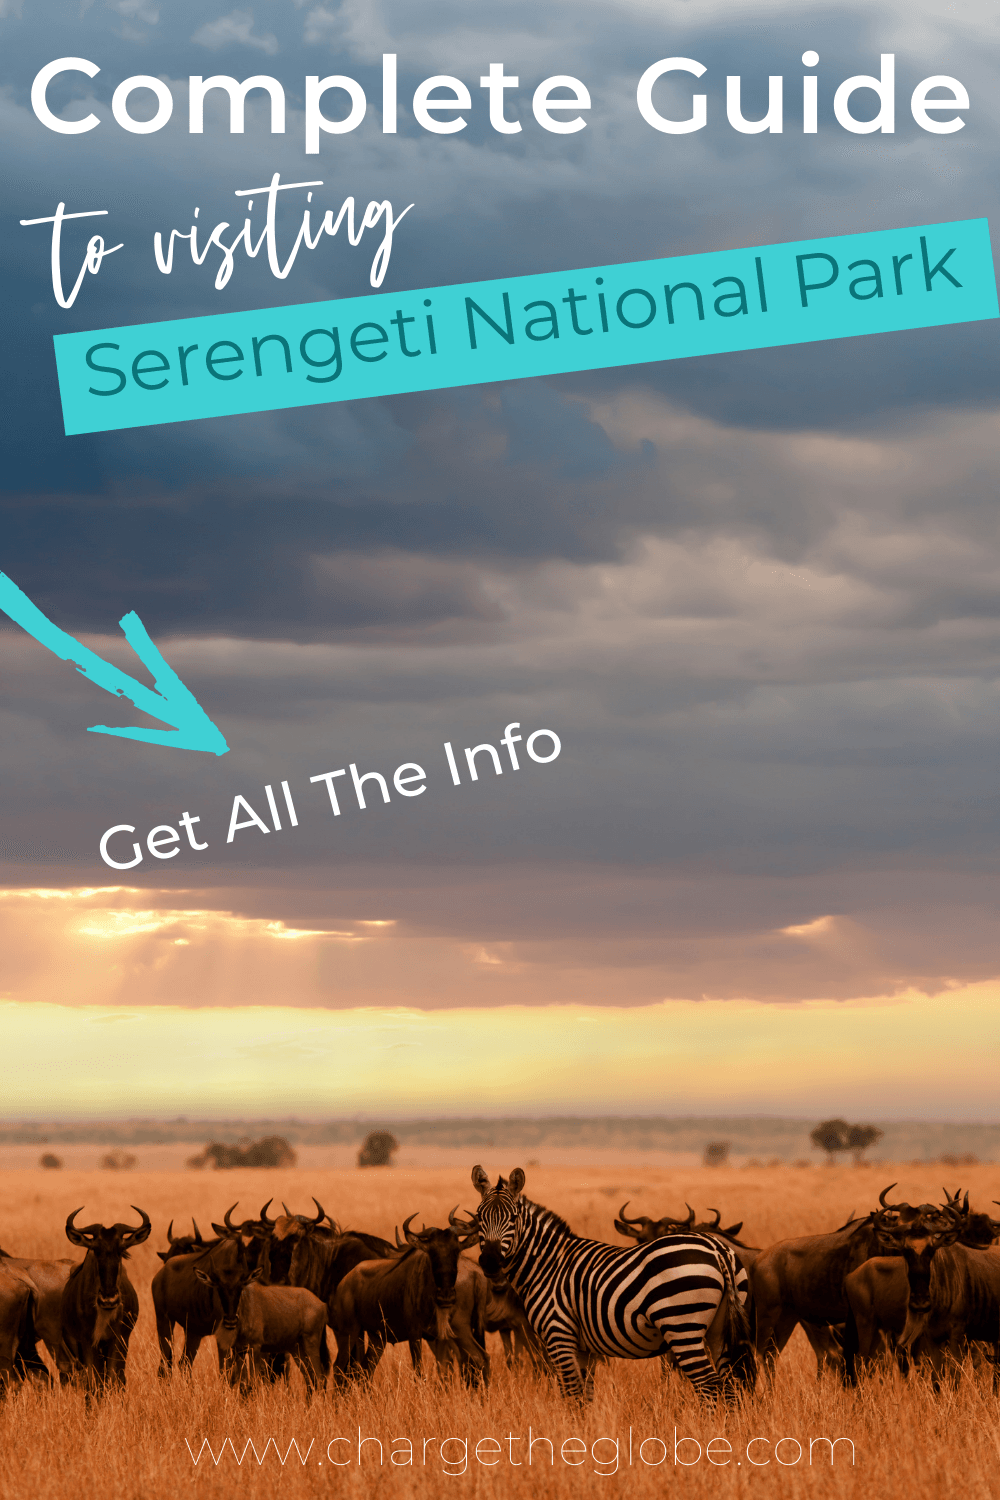 PIN ME! The complete guide to visiting Serengeti National Park